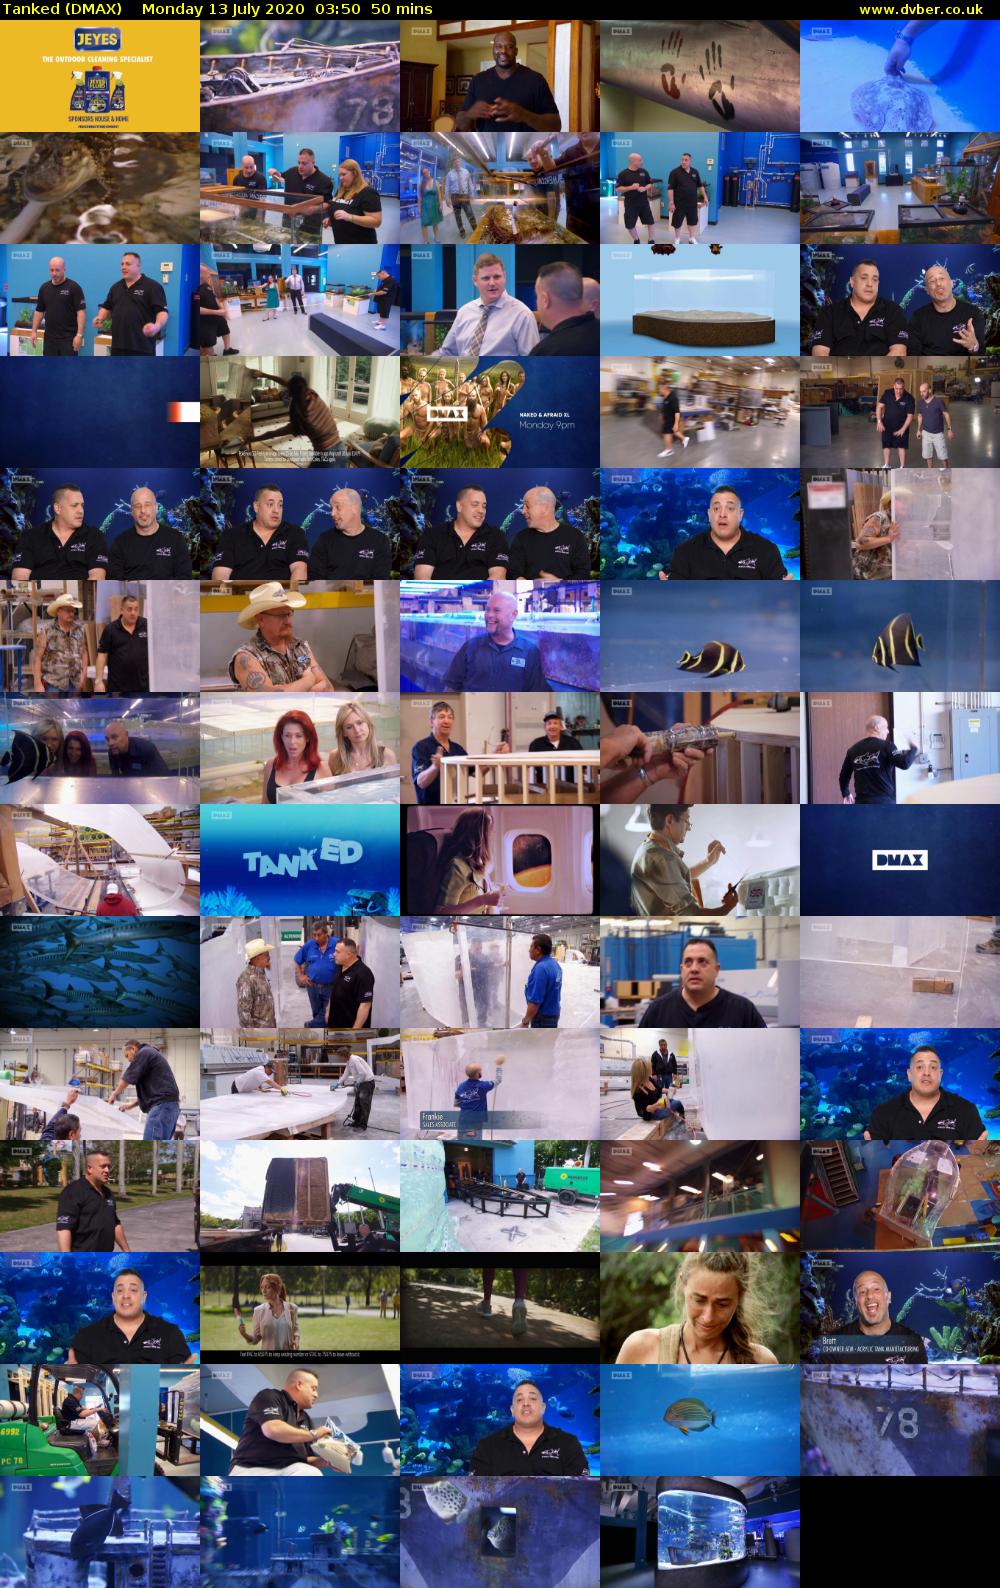 Tanked (DMAX) Monday 13 July 2020 03:50 - 04:40